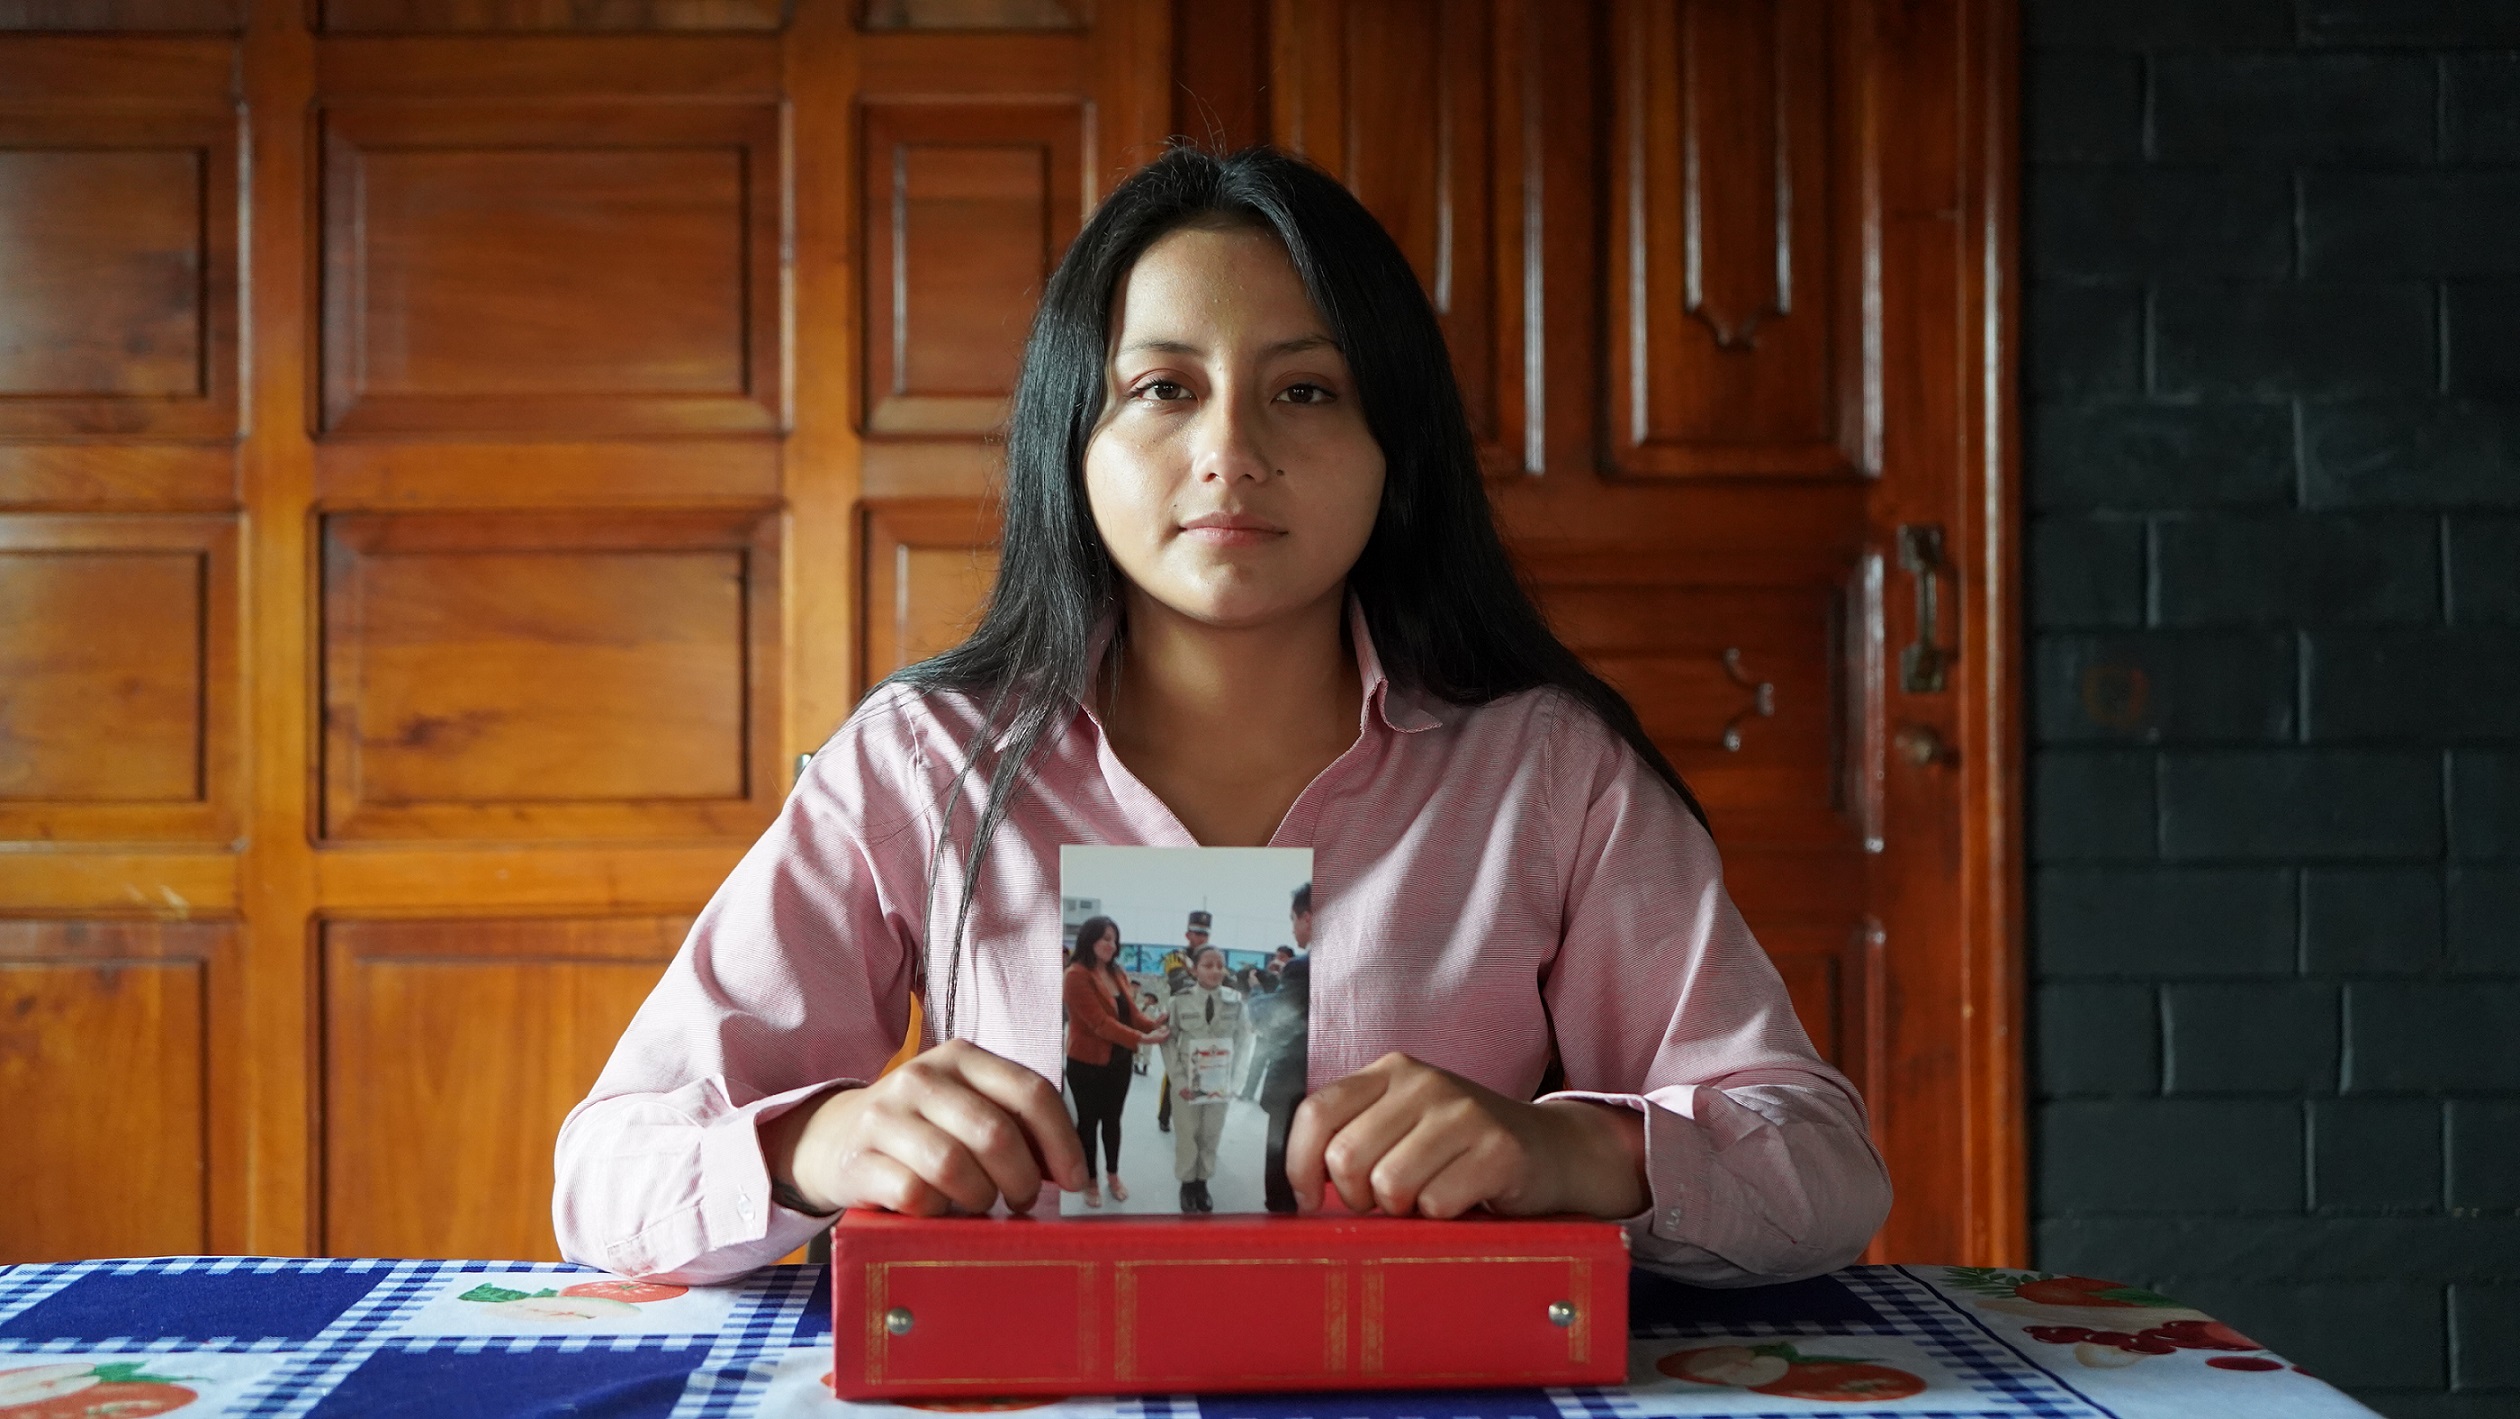 Cfnm Schoolgirl Porn - School-Related Sexual Violence and Young Survivors' Struggle for Justice in  Ecuador | HRW